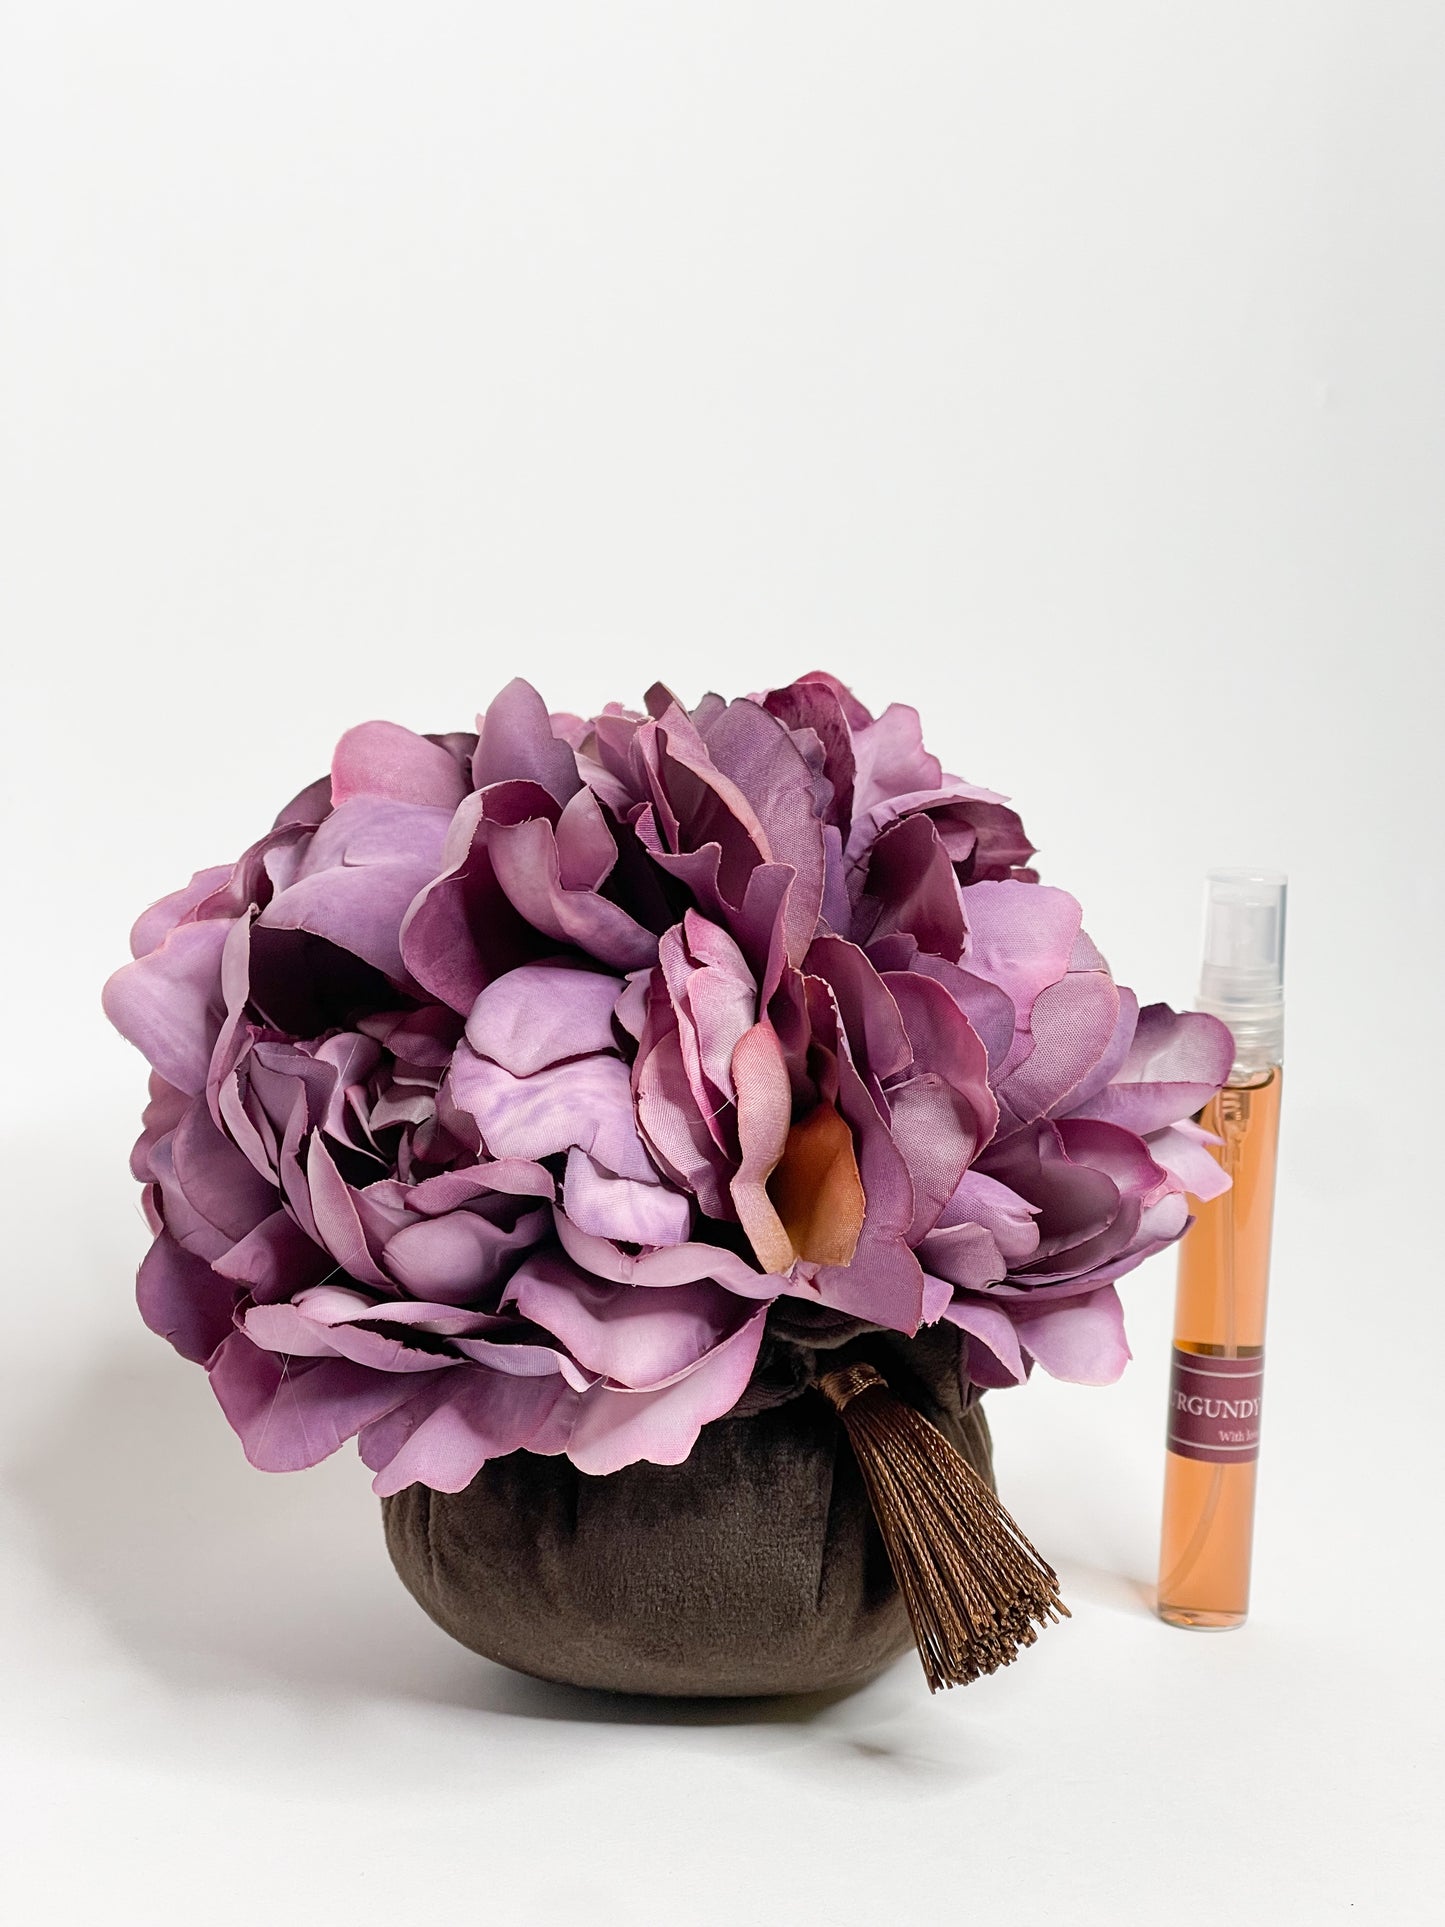 Home fragrance "Bordeaux peonies in a brown basket"